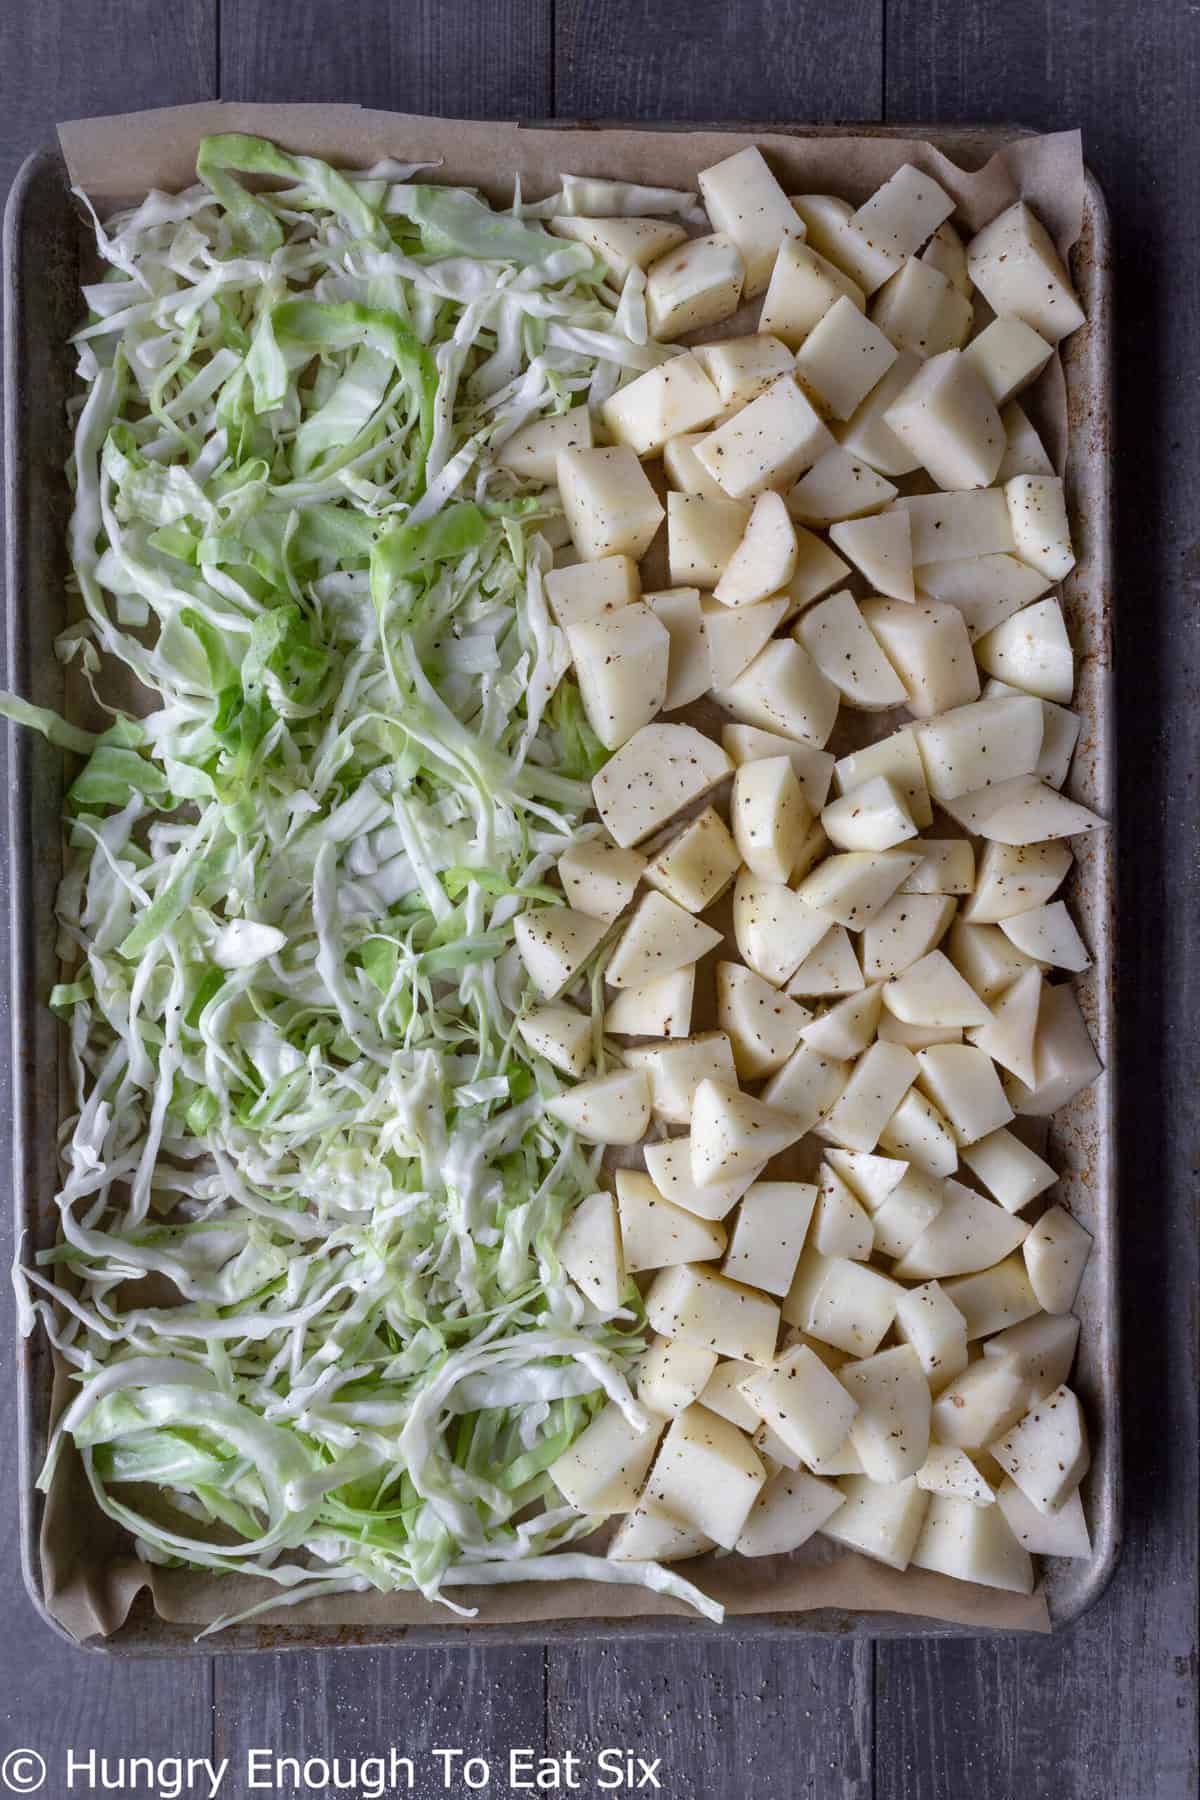 Uncooked sliced cabbage and potatoes on sheet pan.